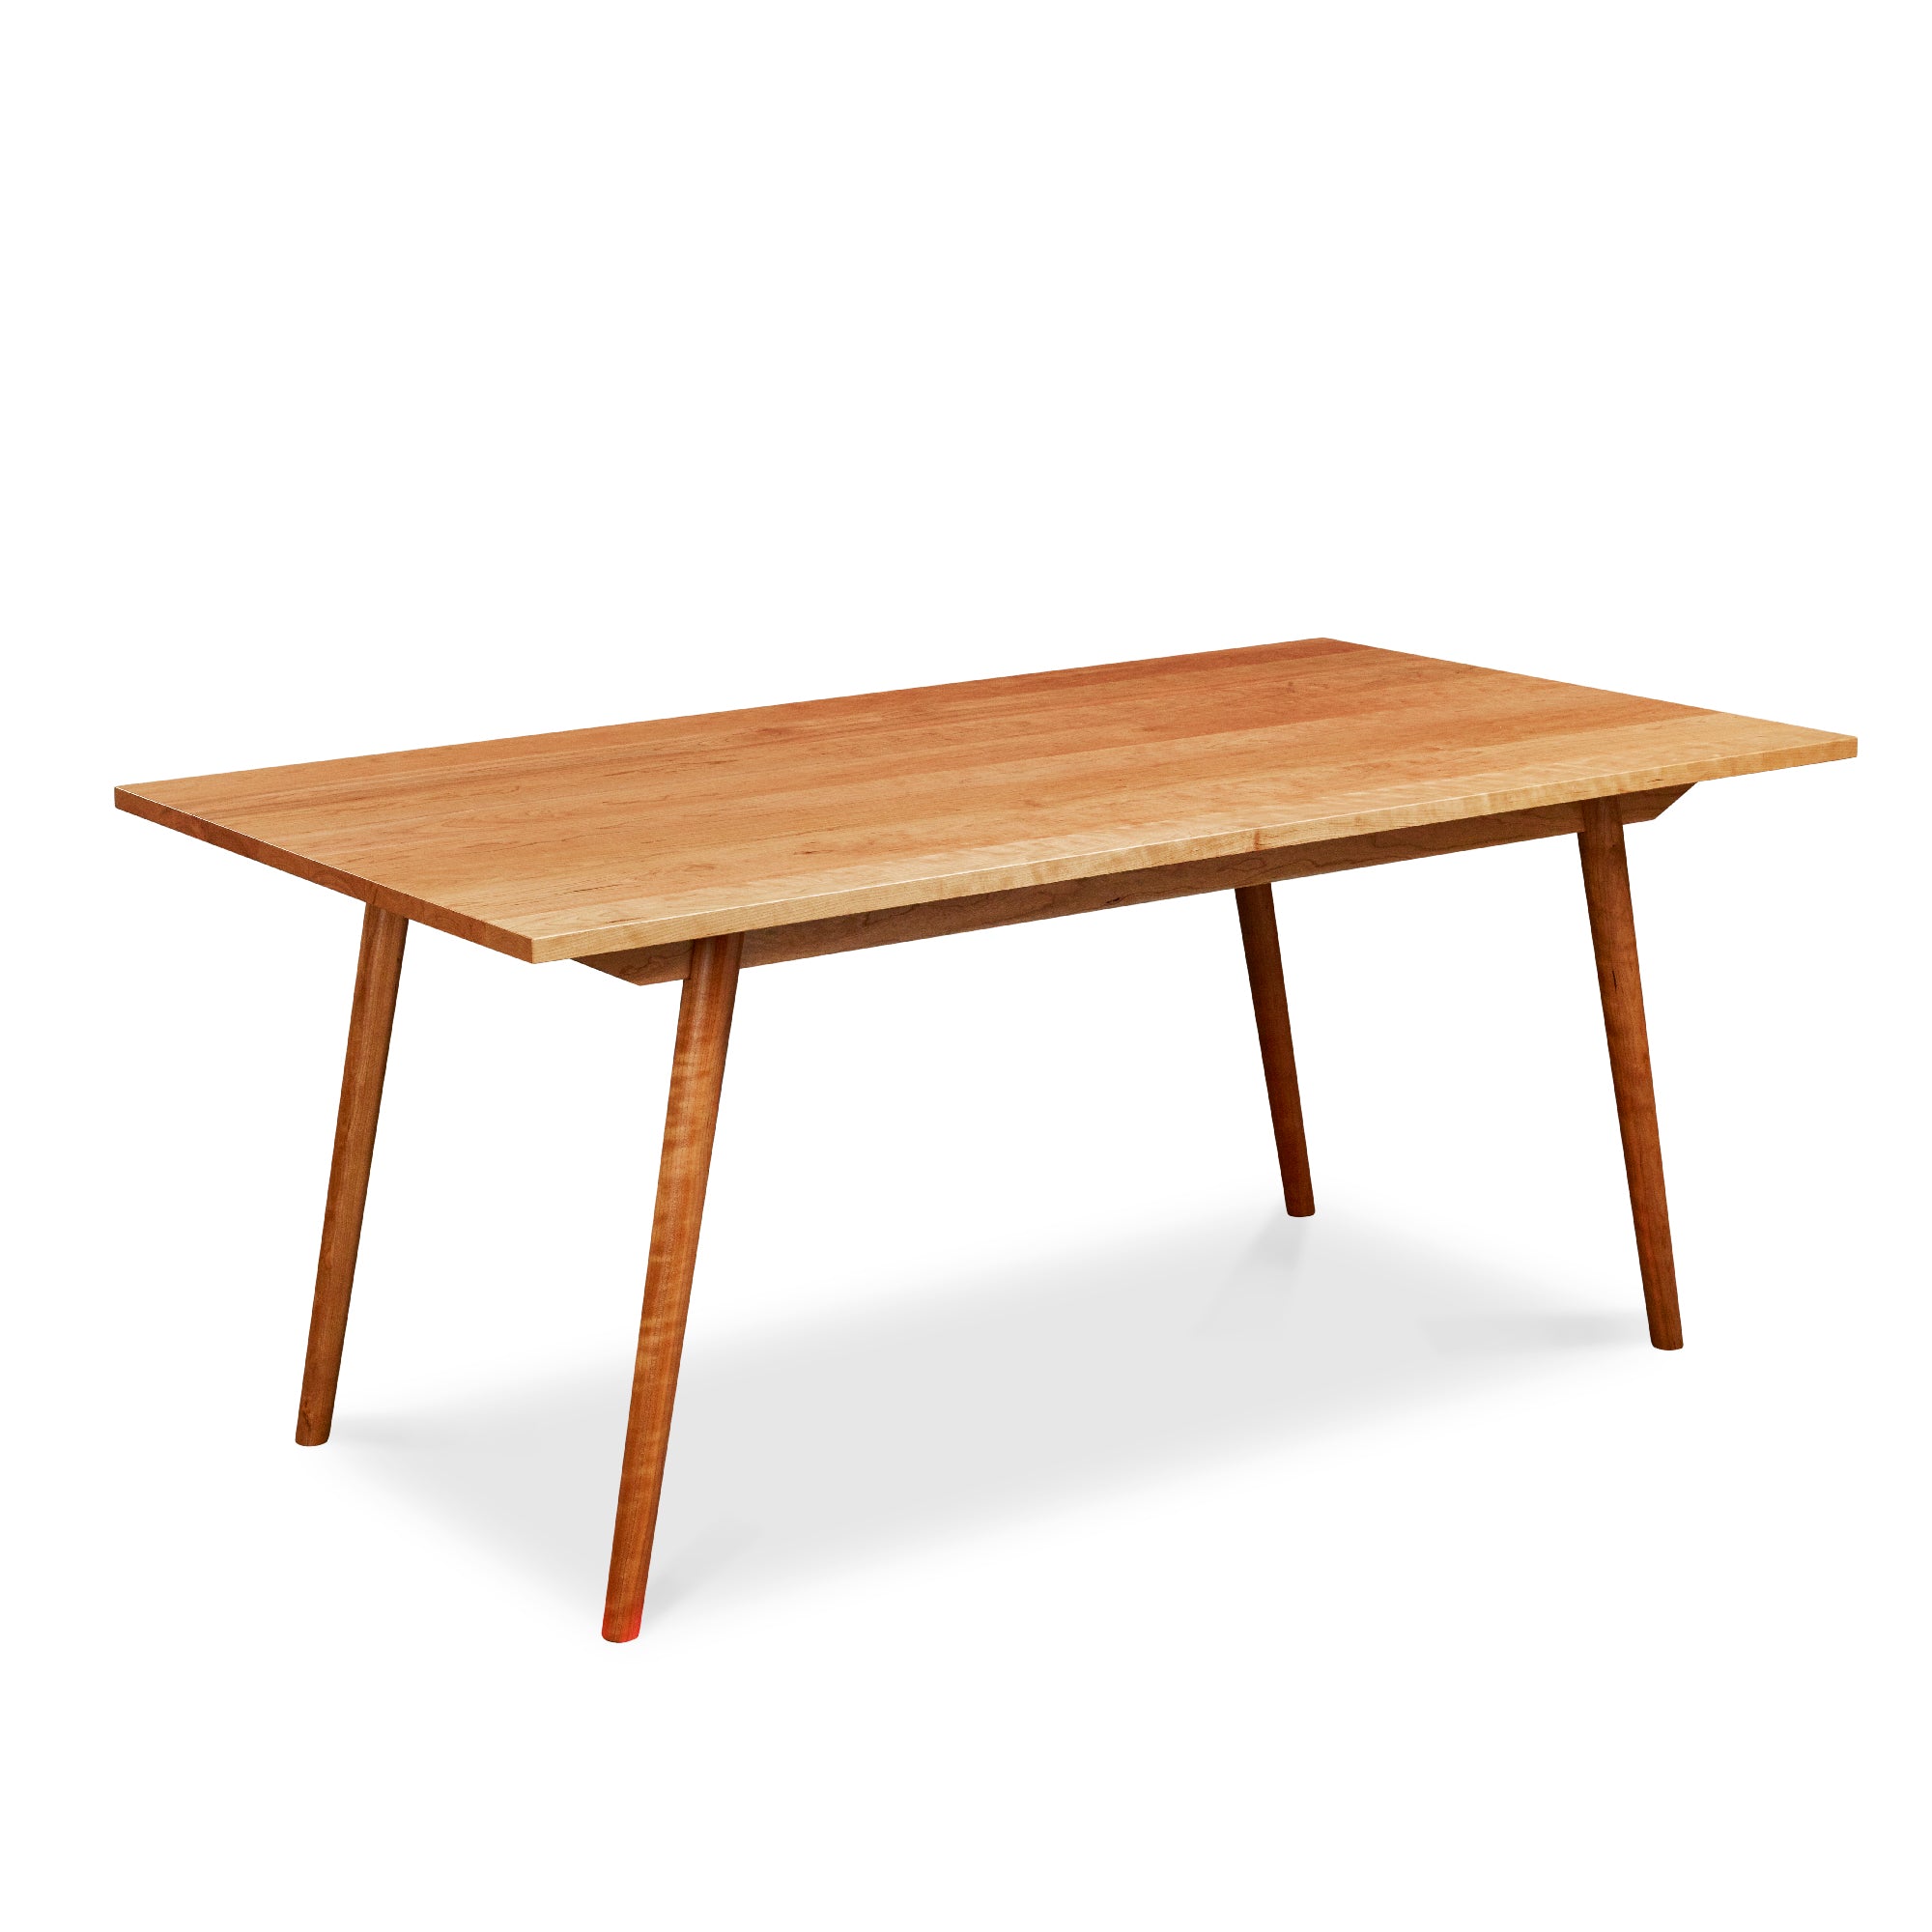 Mid-century Scandinavian rectangle dining table with angled legs in solid cherry wood